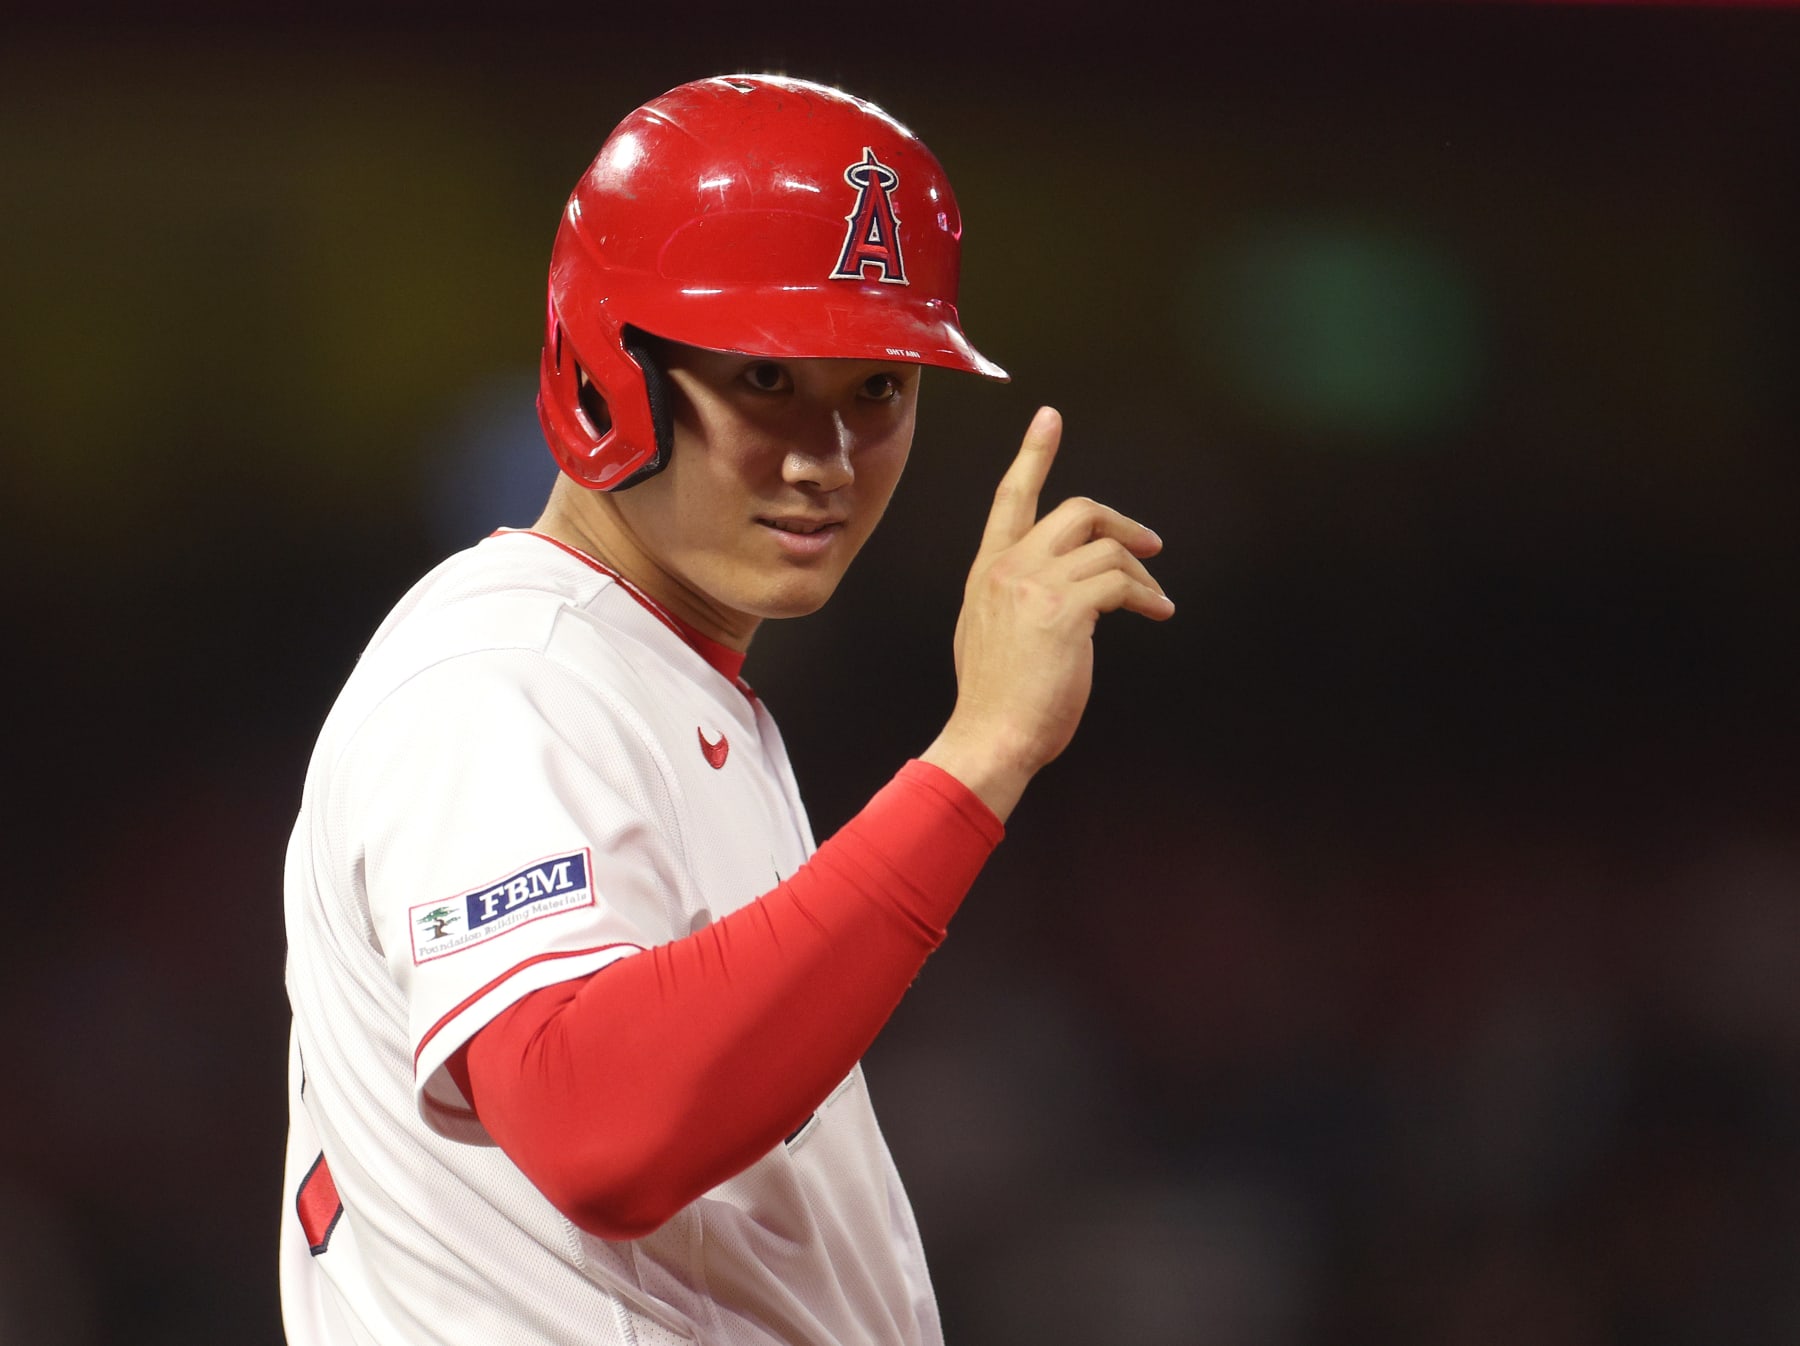 Shohei Ohtani rivals Babe Ruth as an all time great, says MLB